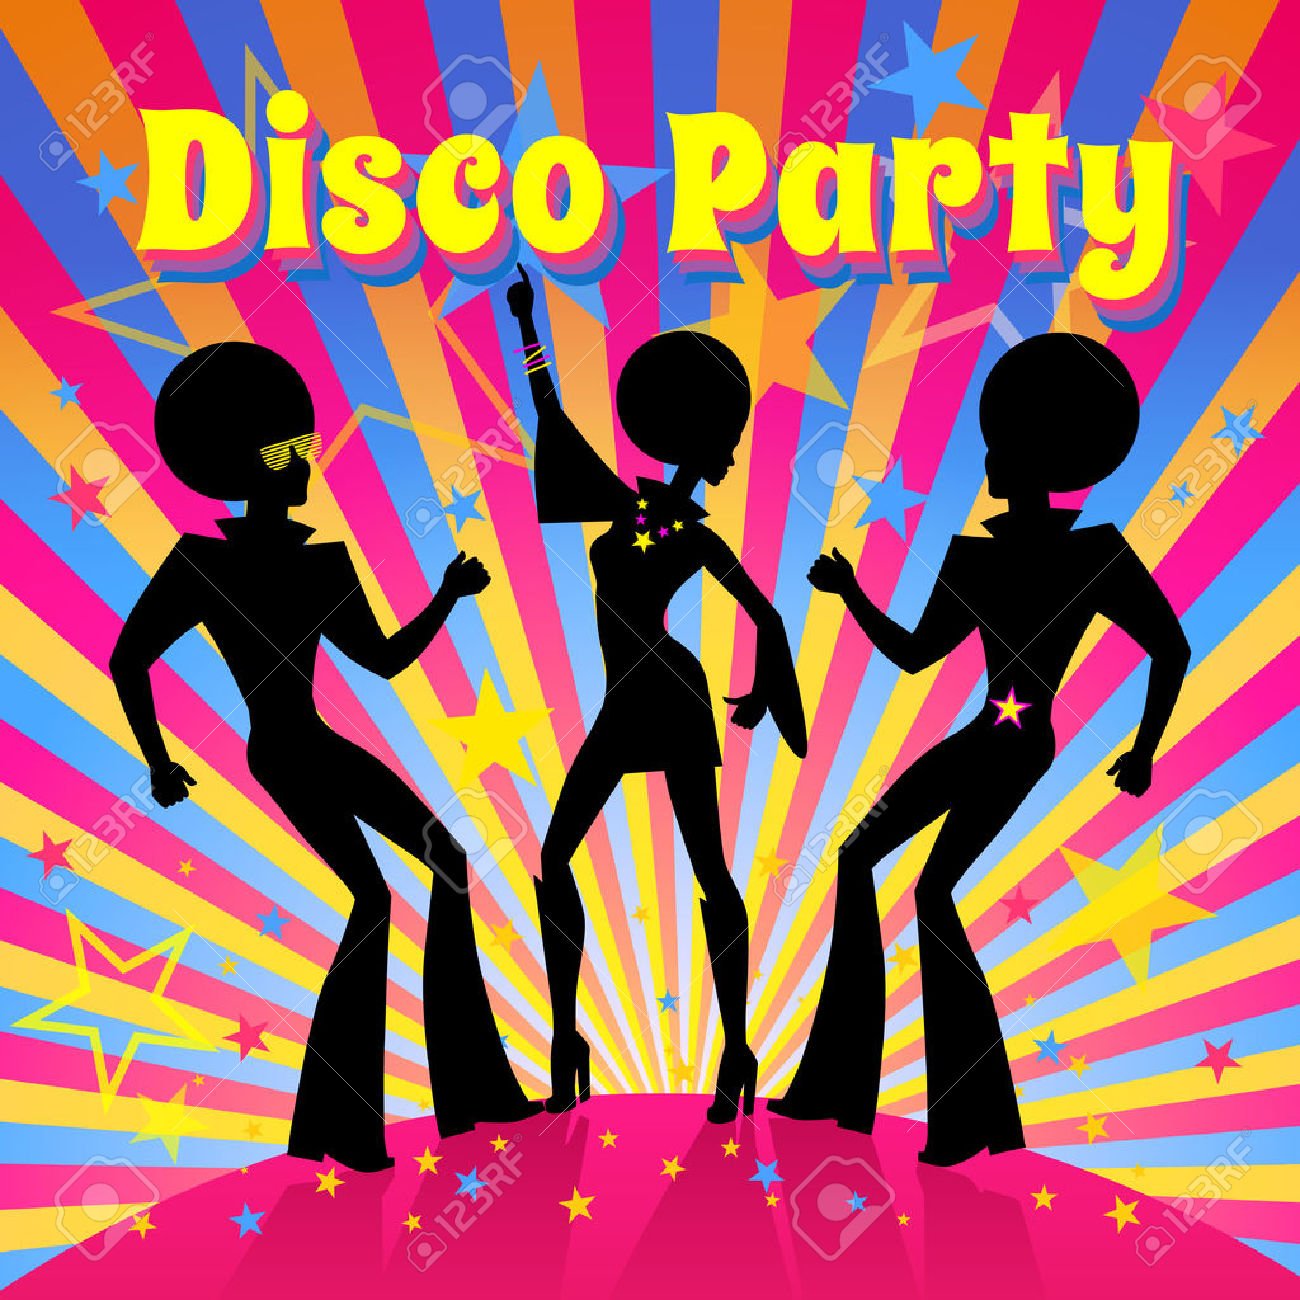 Disco Party Invitation Template With Silhouette Of A Dancing